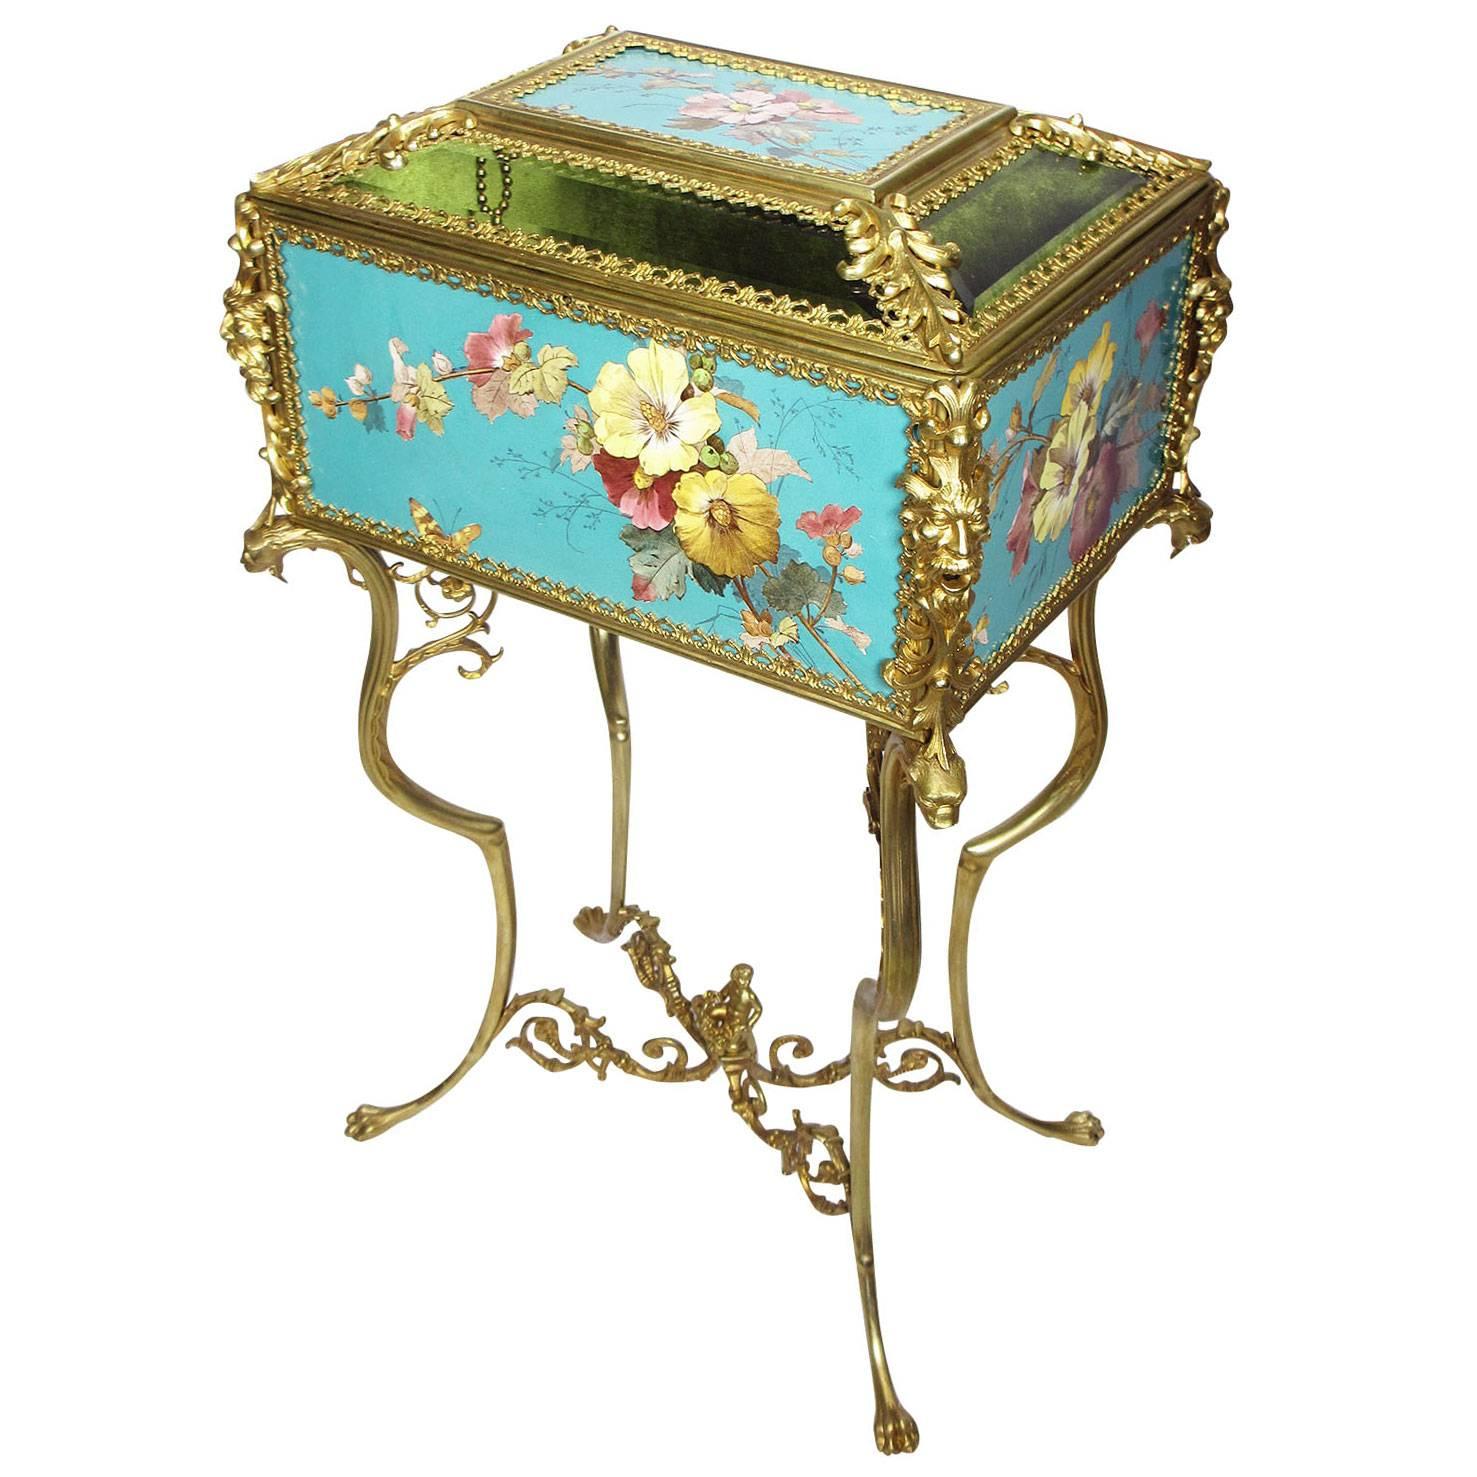 Superb Early 20th Century Aesthetic Movement Majolica & Gilt-Metal Jewelry Box